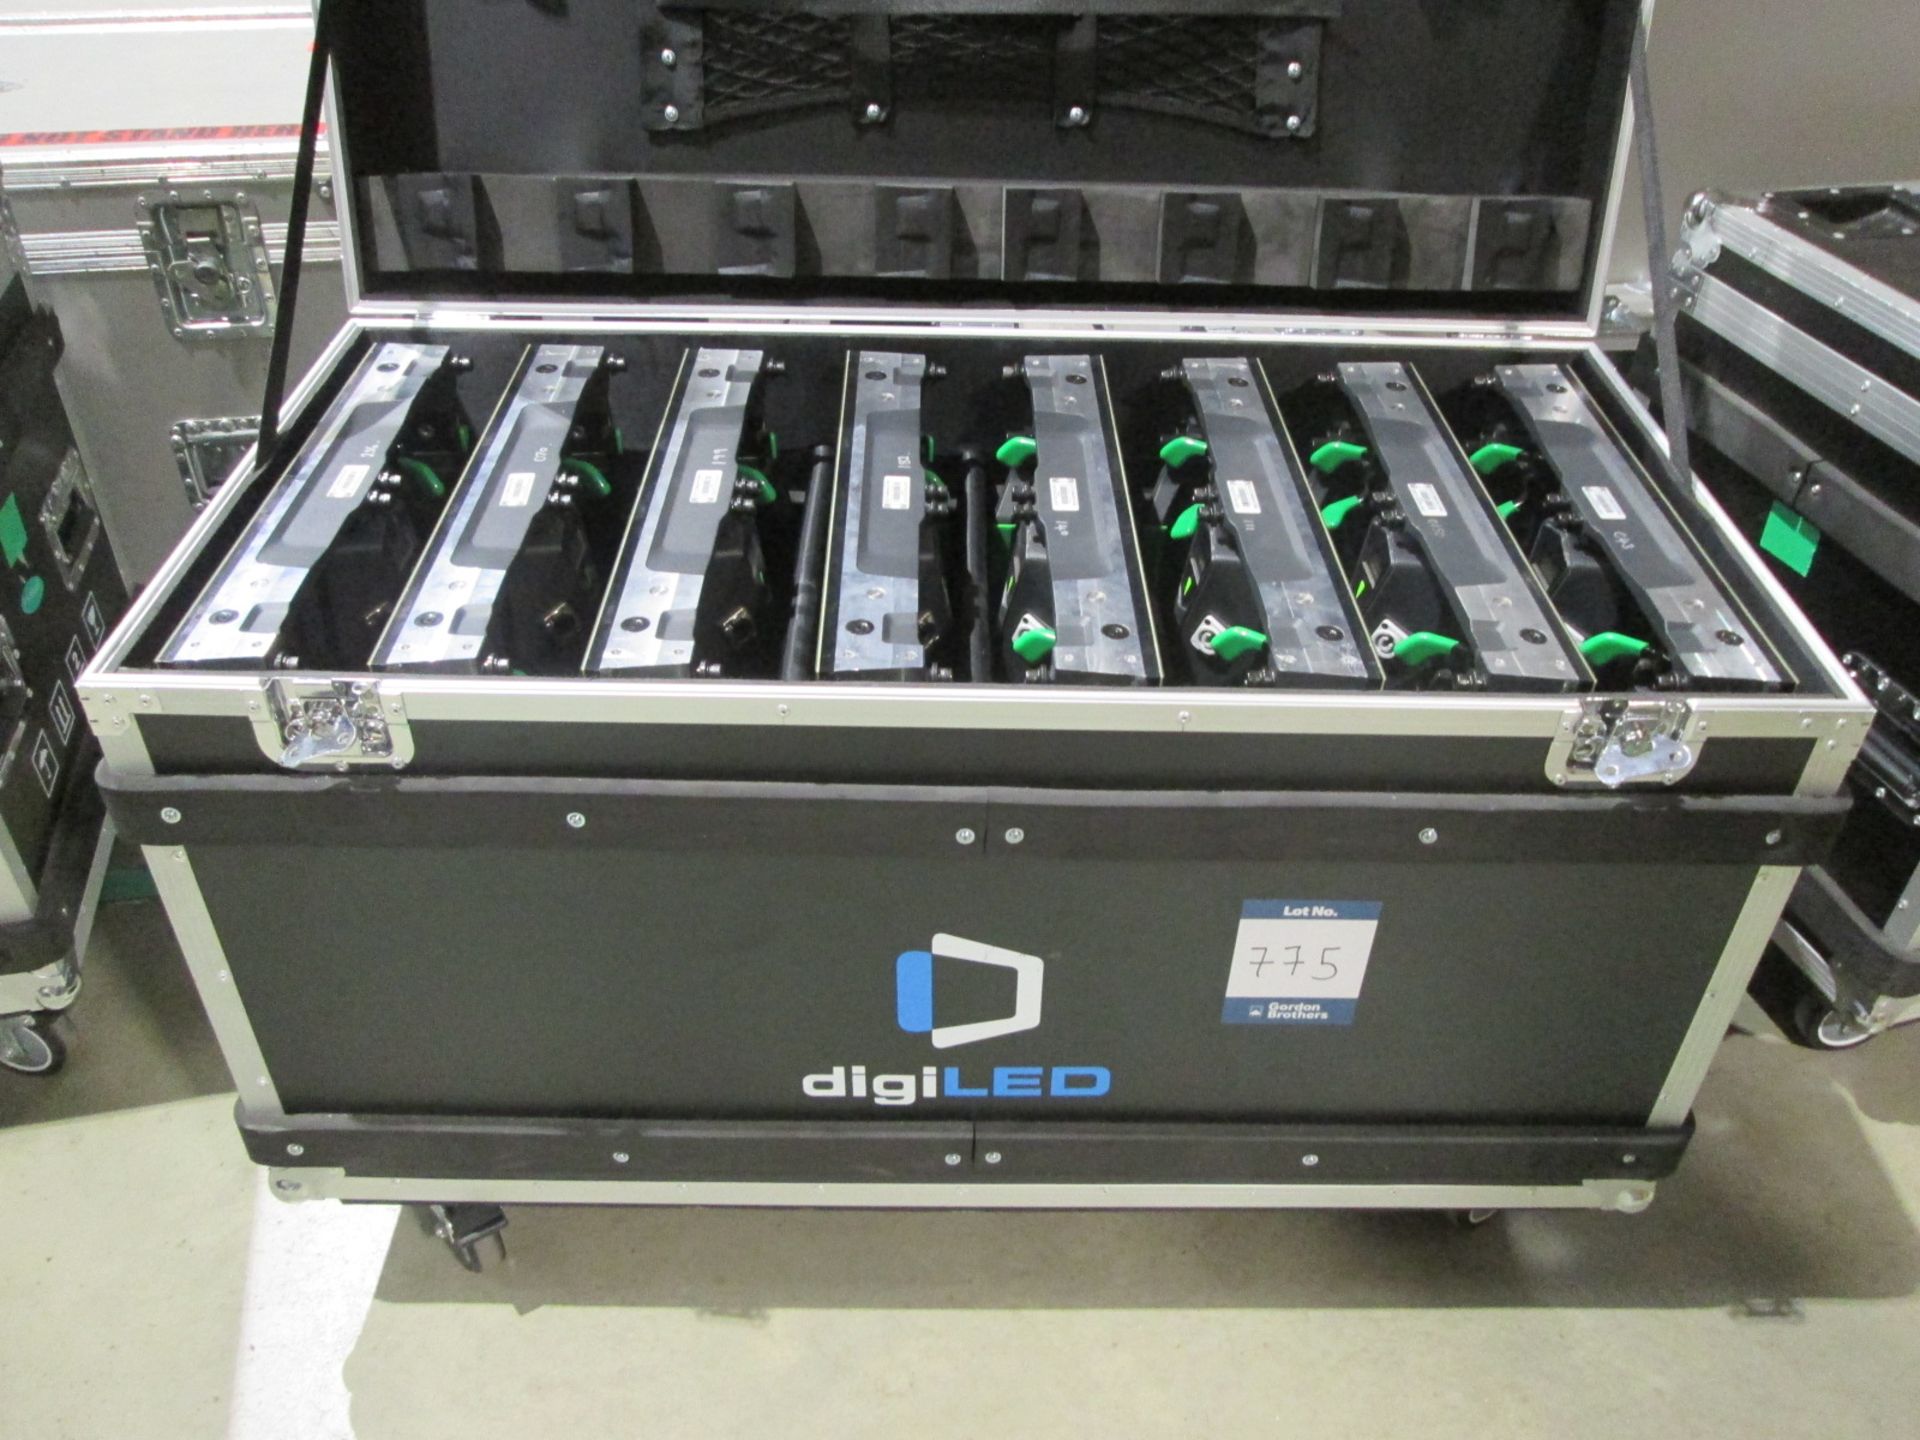 DigiLED x-Tek 2600 LED Modules (Green) Qty 8 off in flight case. Note tiles only no cables (Please